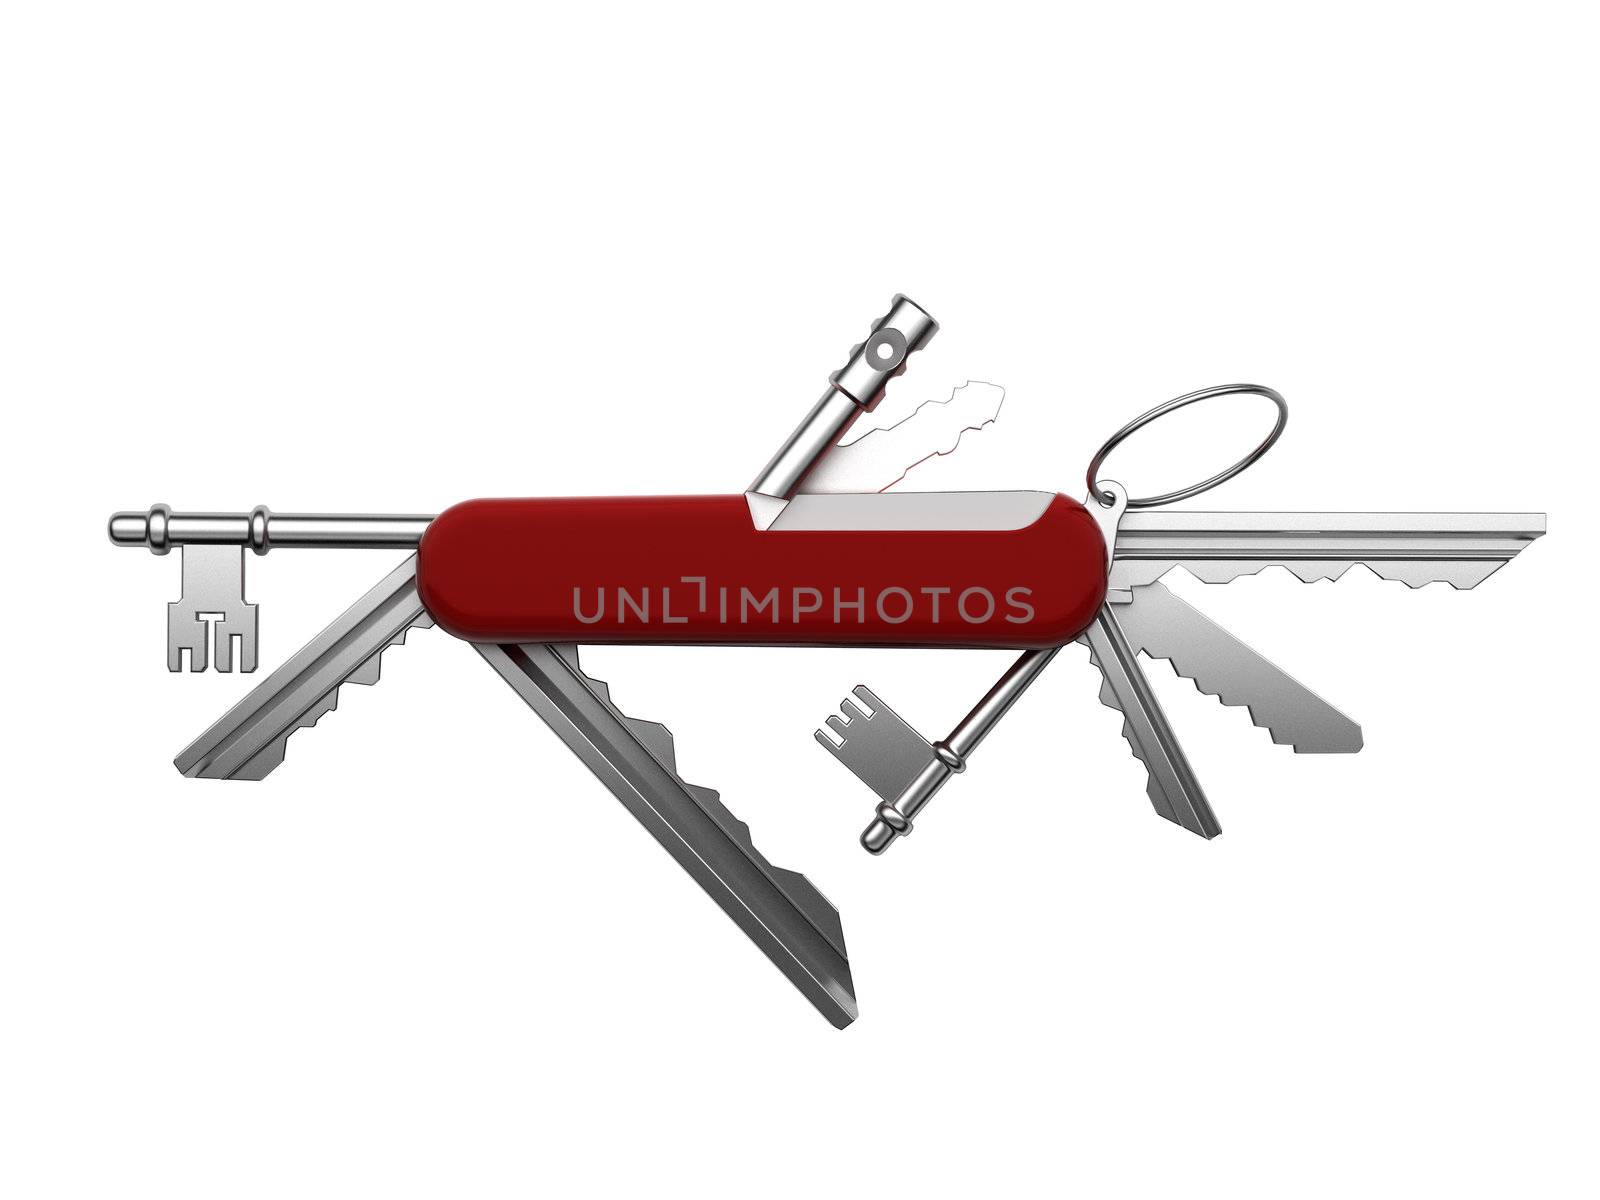 Creative metaphor of universal keys from the estate in a single tool based on the Swiss army pocket knife